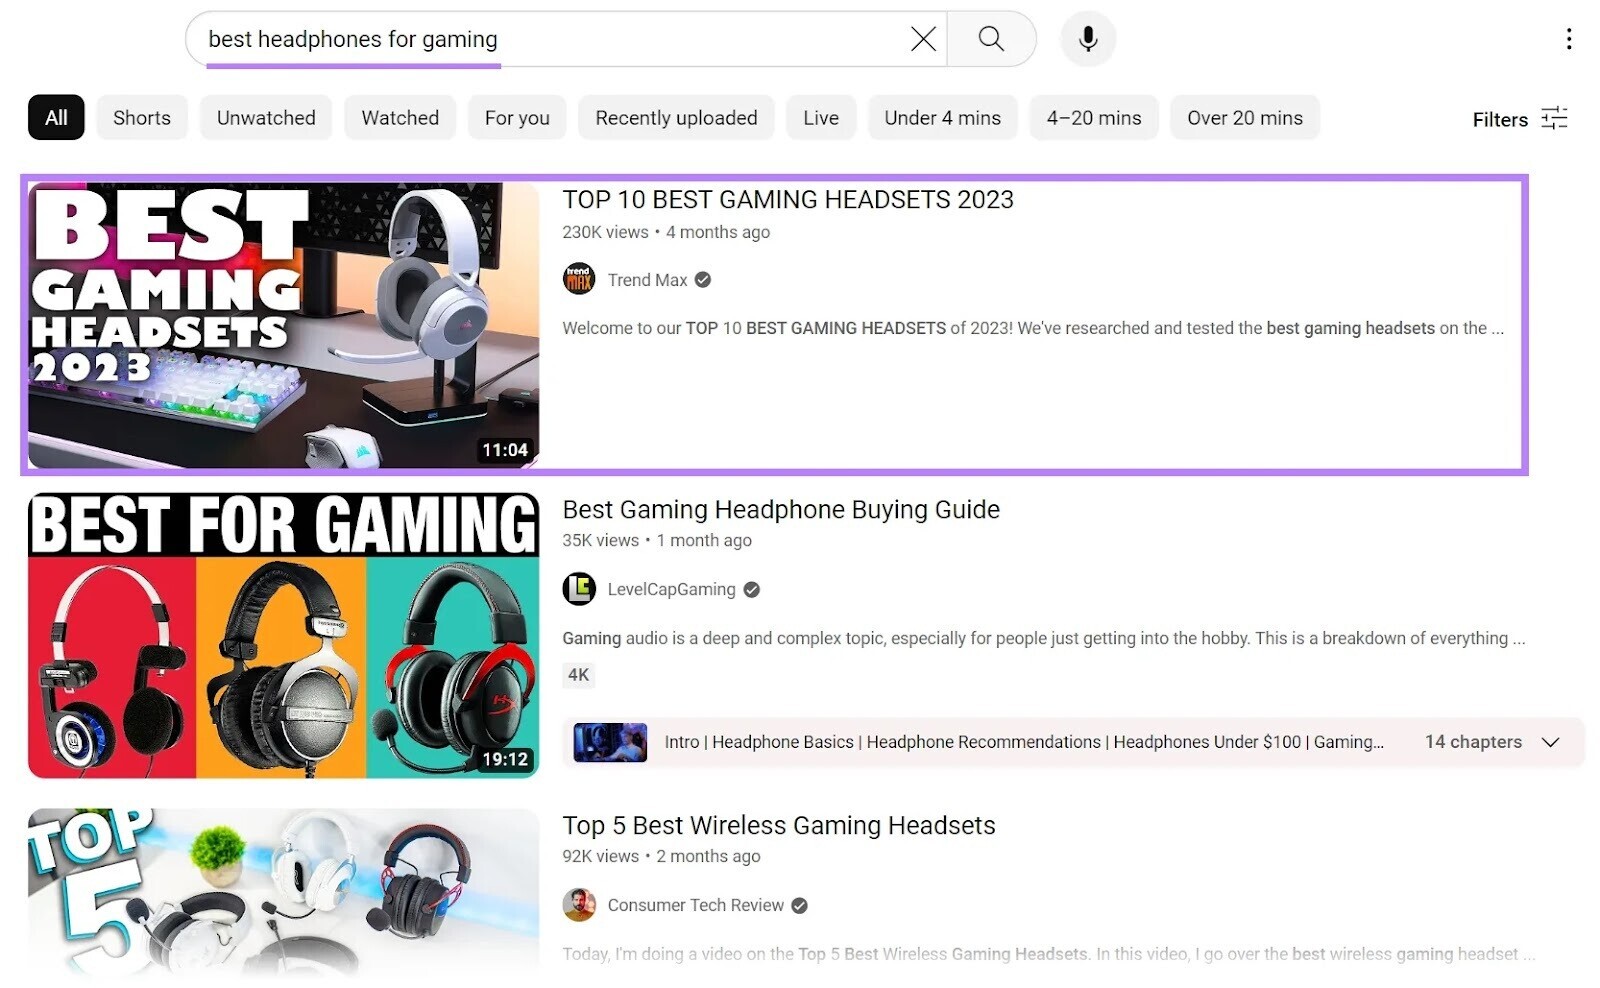 YouTube results for "best headphones for gaming"